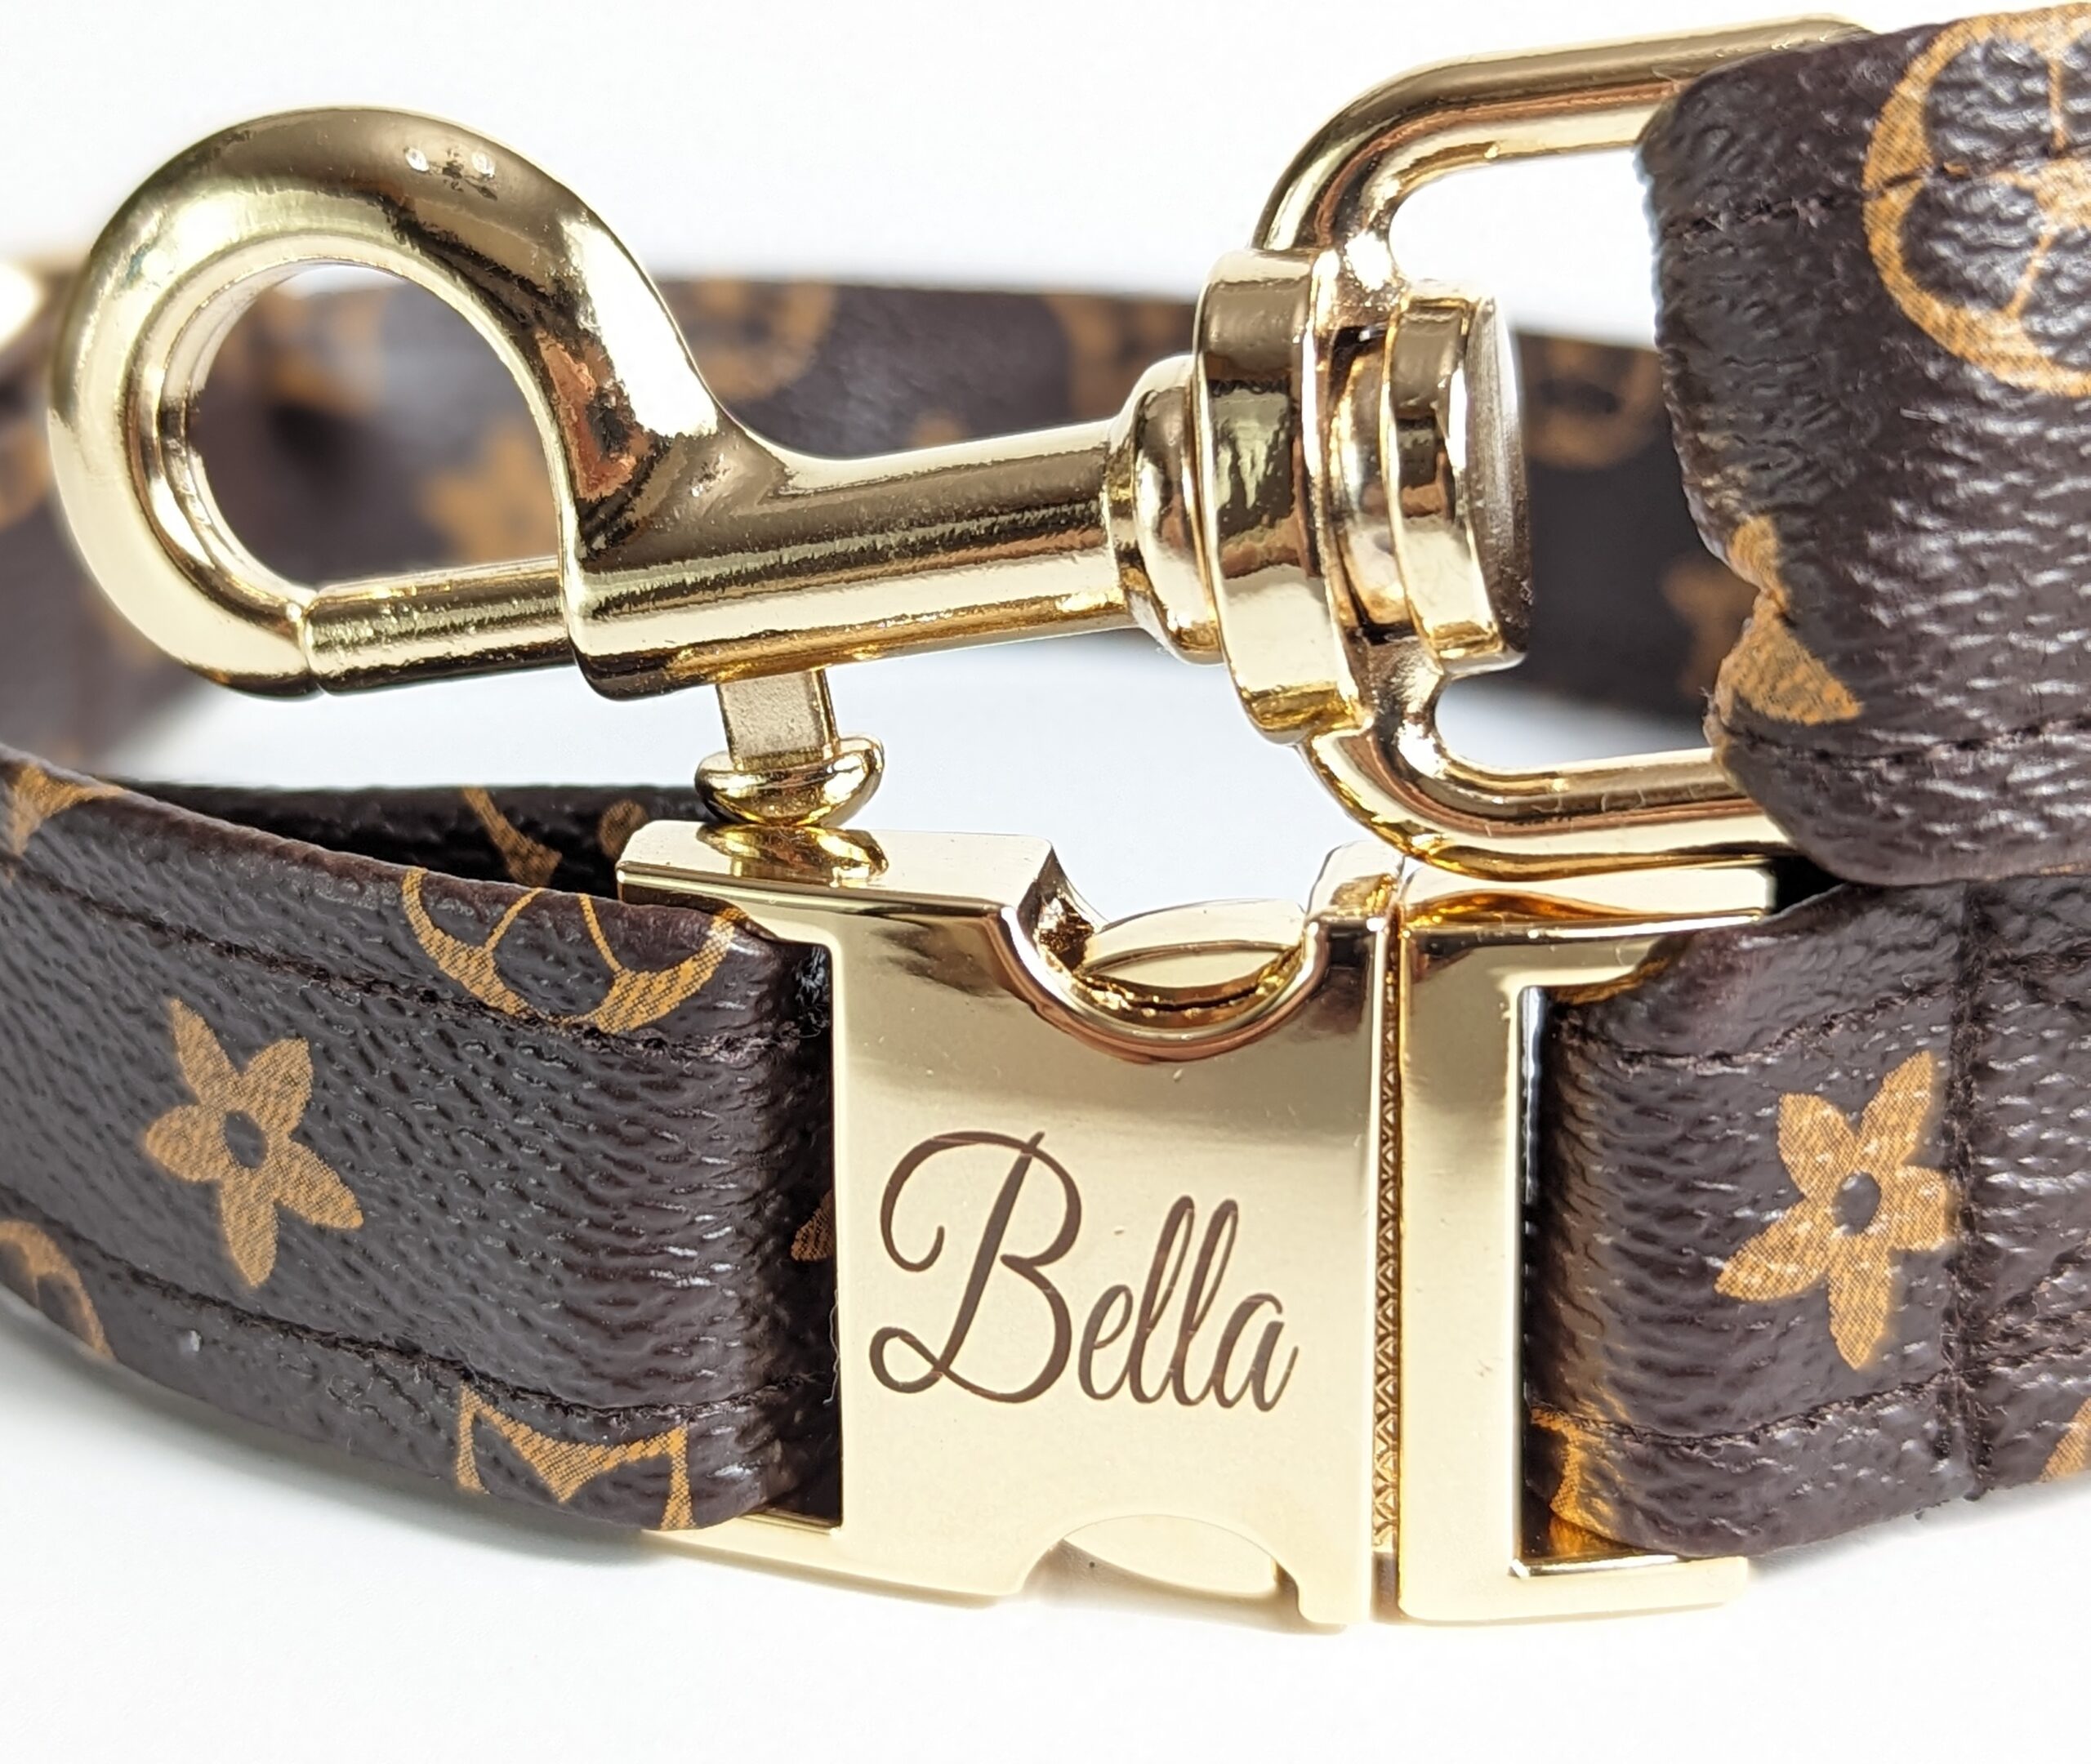 Louis Vuitton dog collar and leash